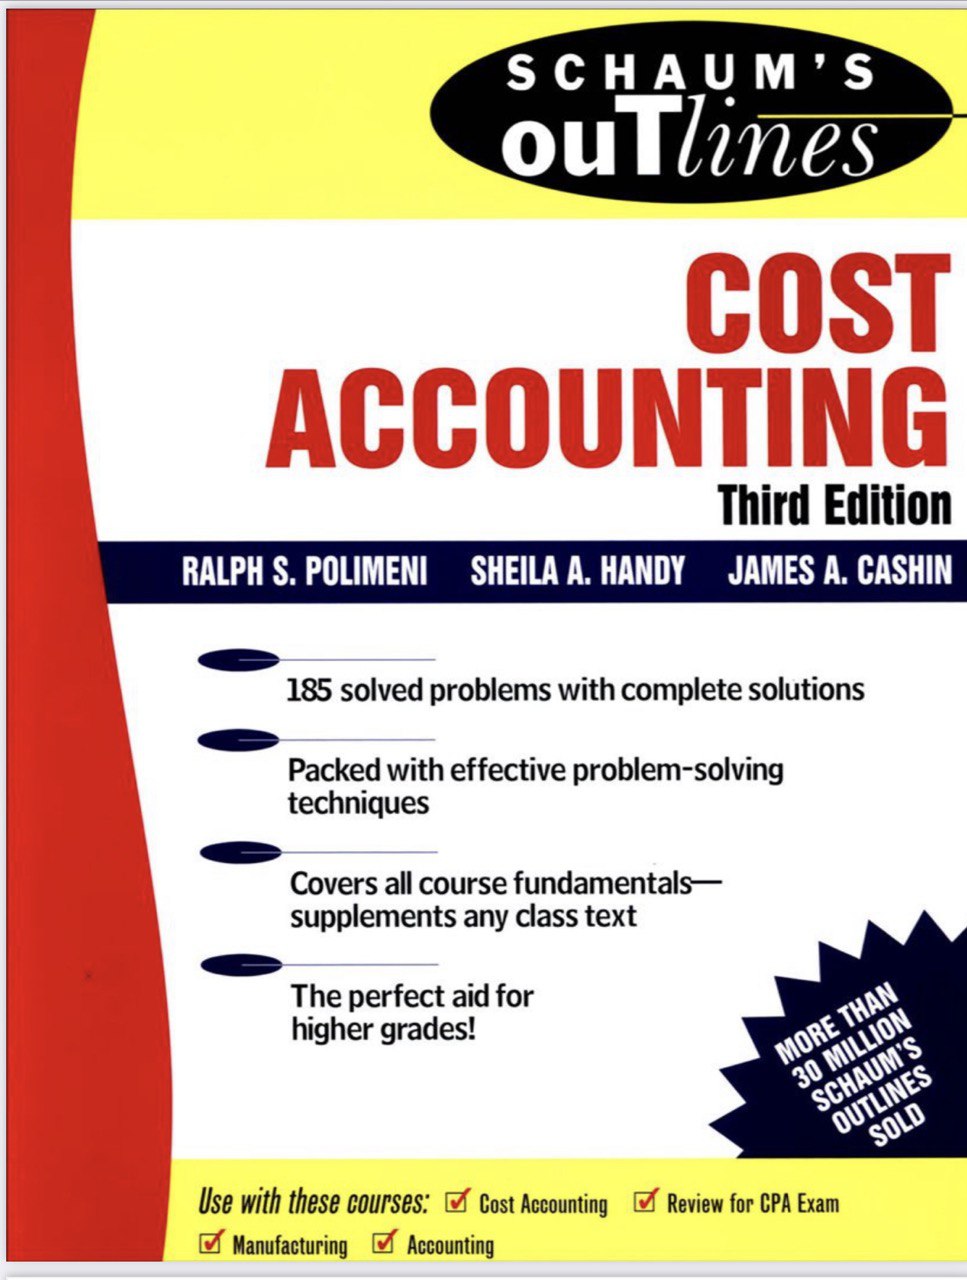 COST ACCOUNTING-THIRD EDITION